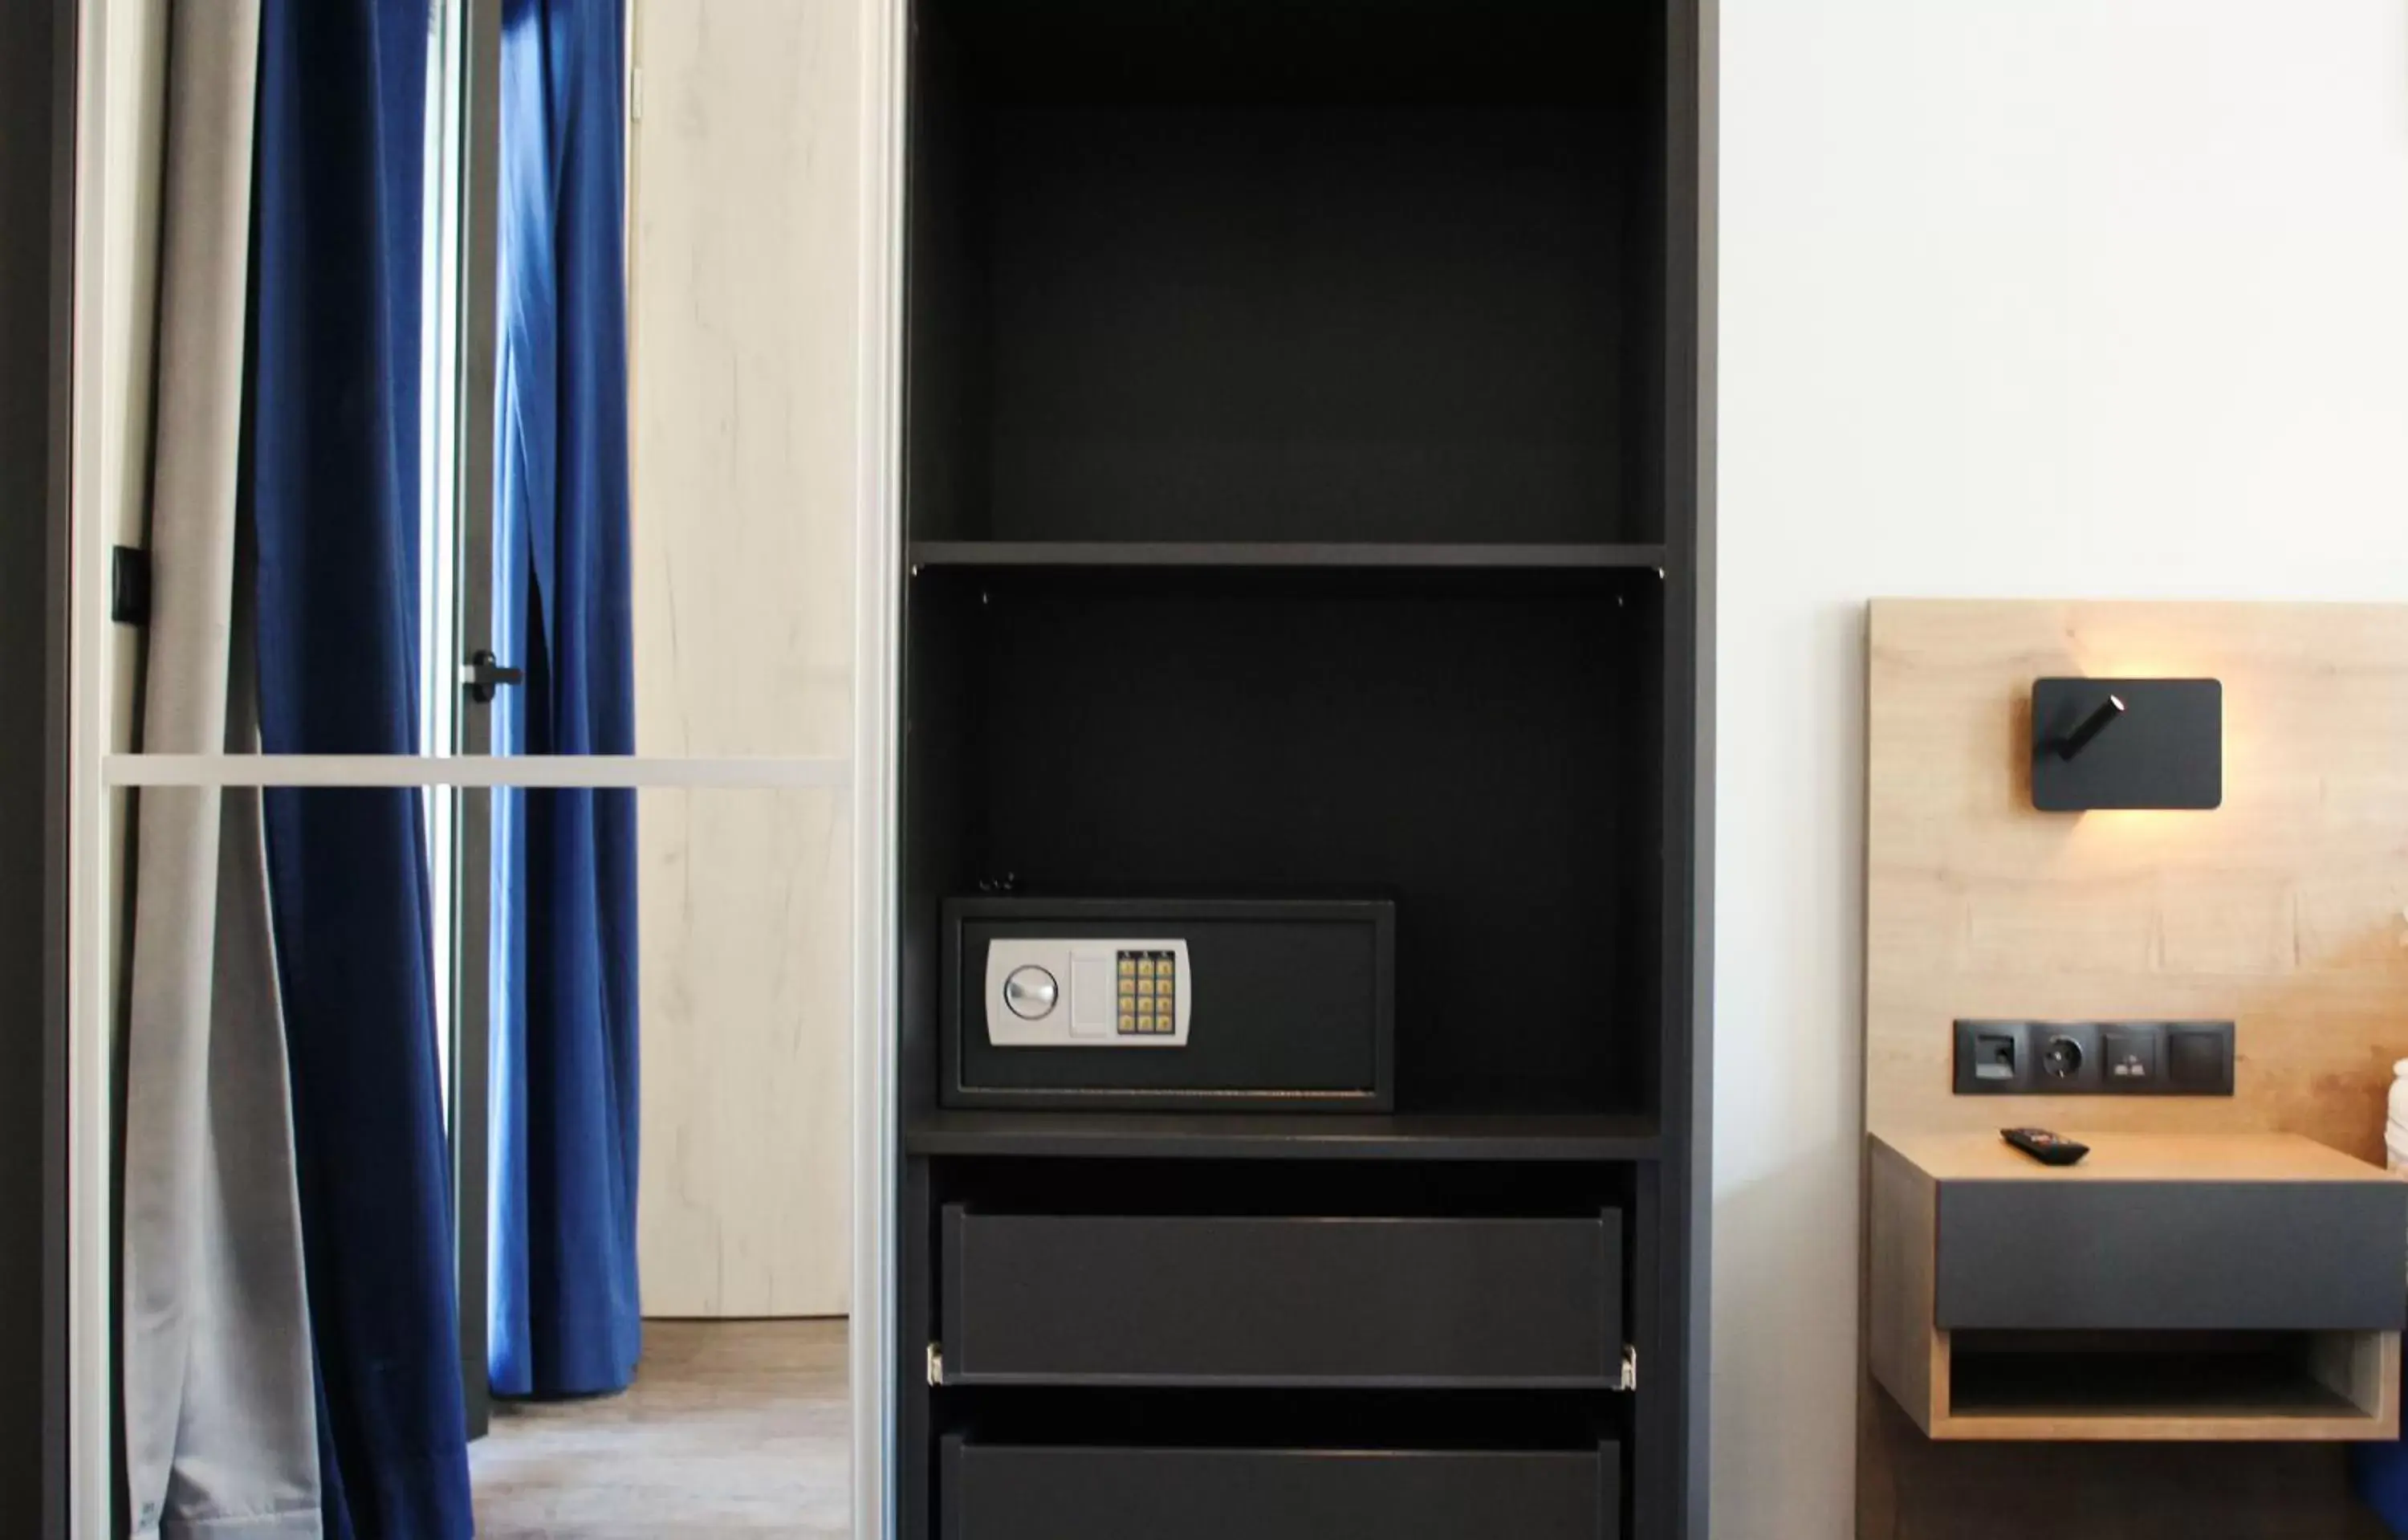 safe, TV/Entertainment Center in Exarchia House Project